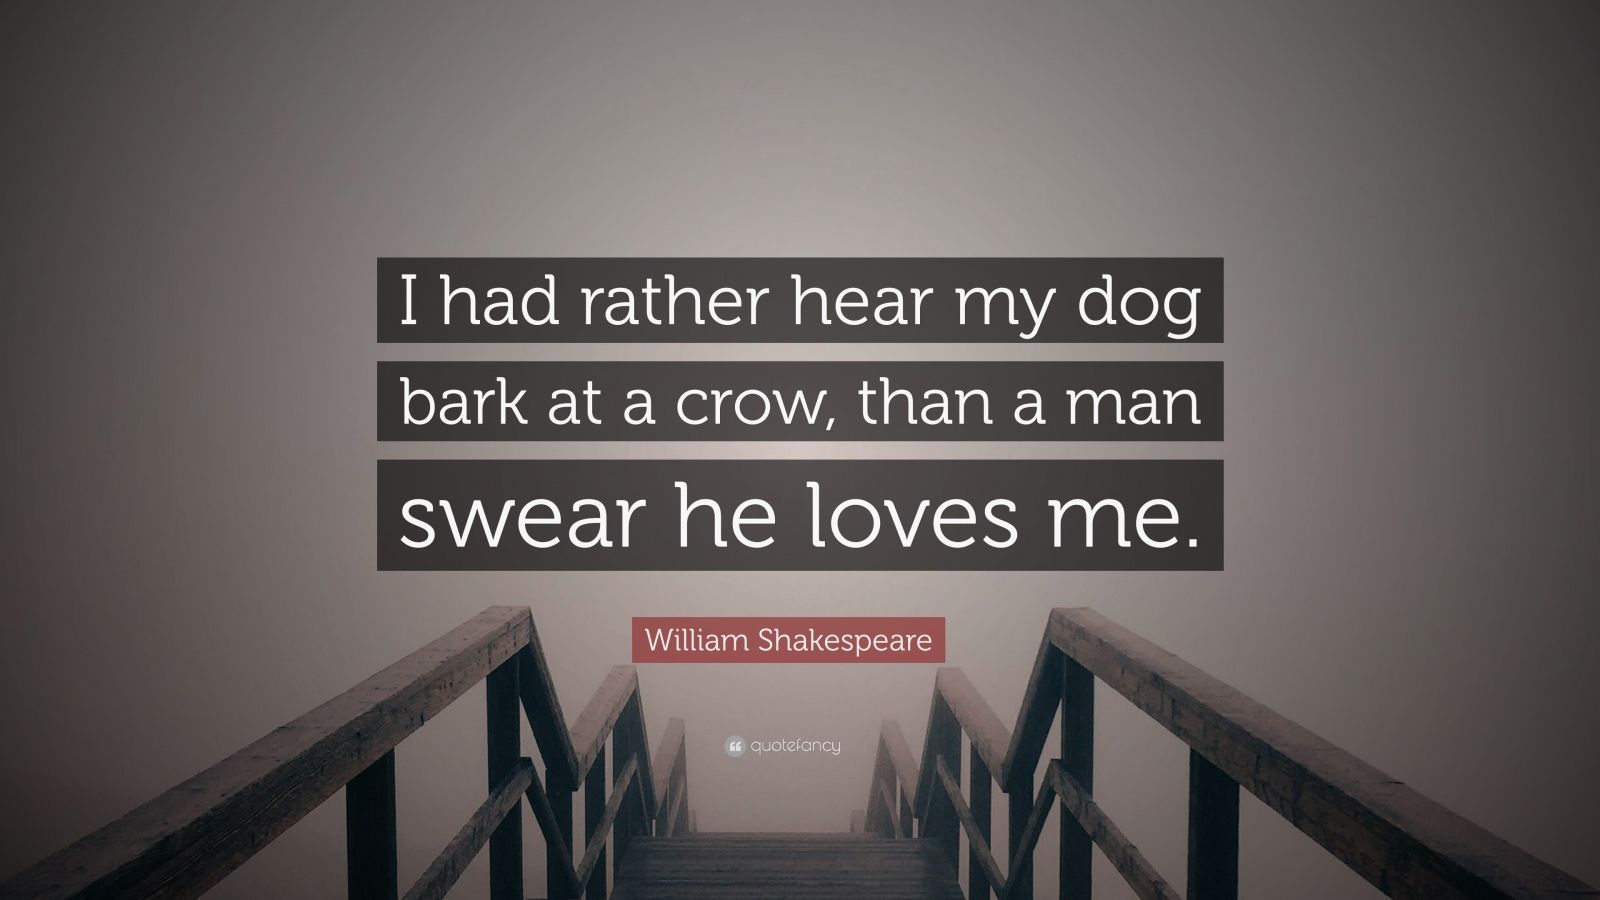 William Shakespeare Quote “I had rather hear my dog bark at a crow